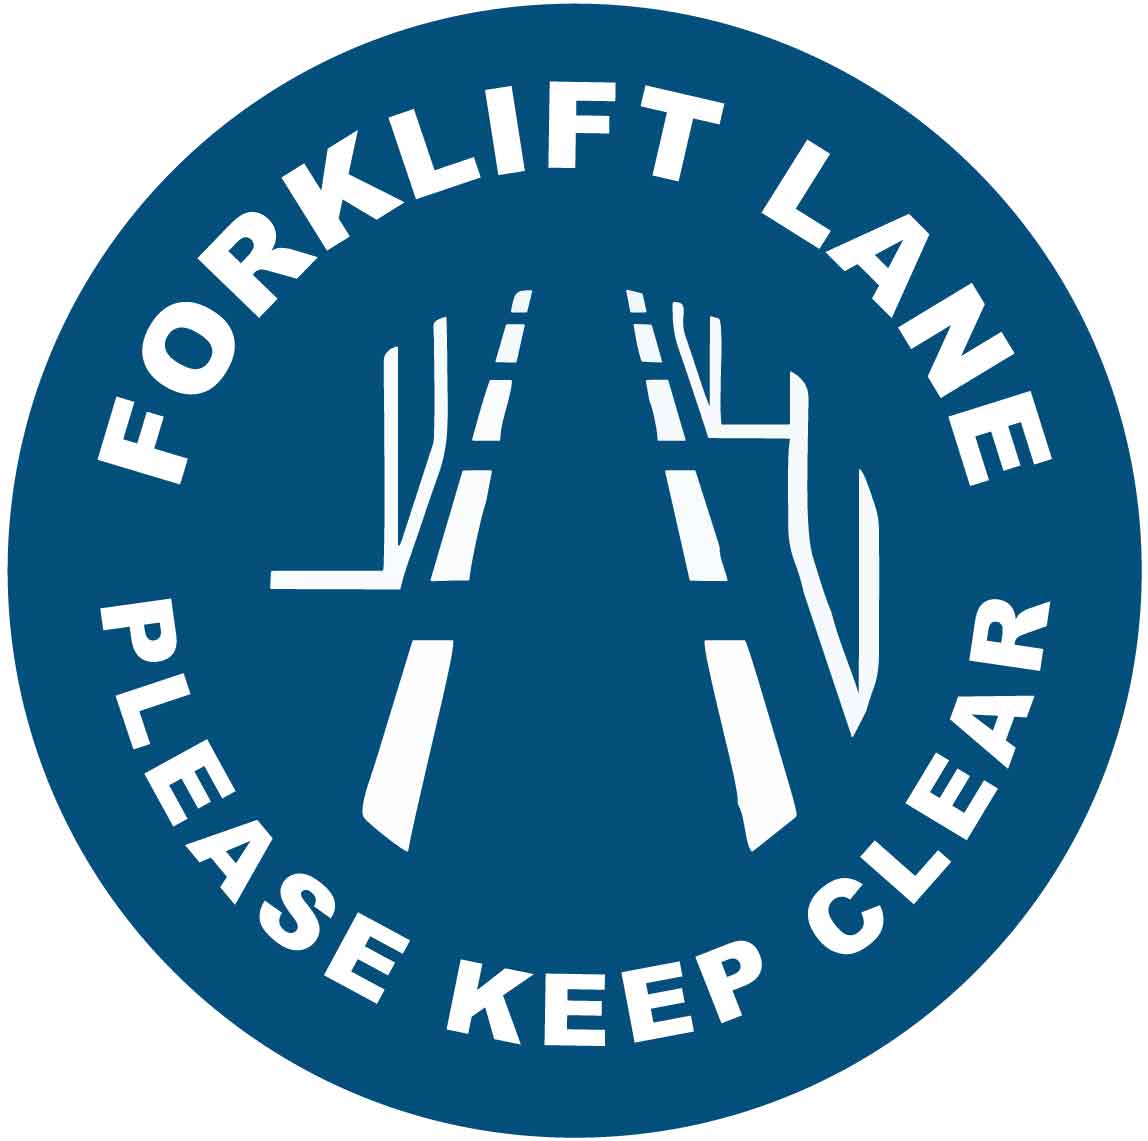 Forklift Lane Please Keep Clear Decal